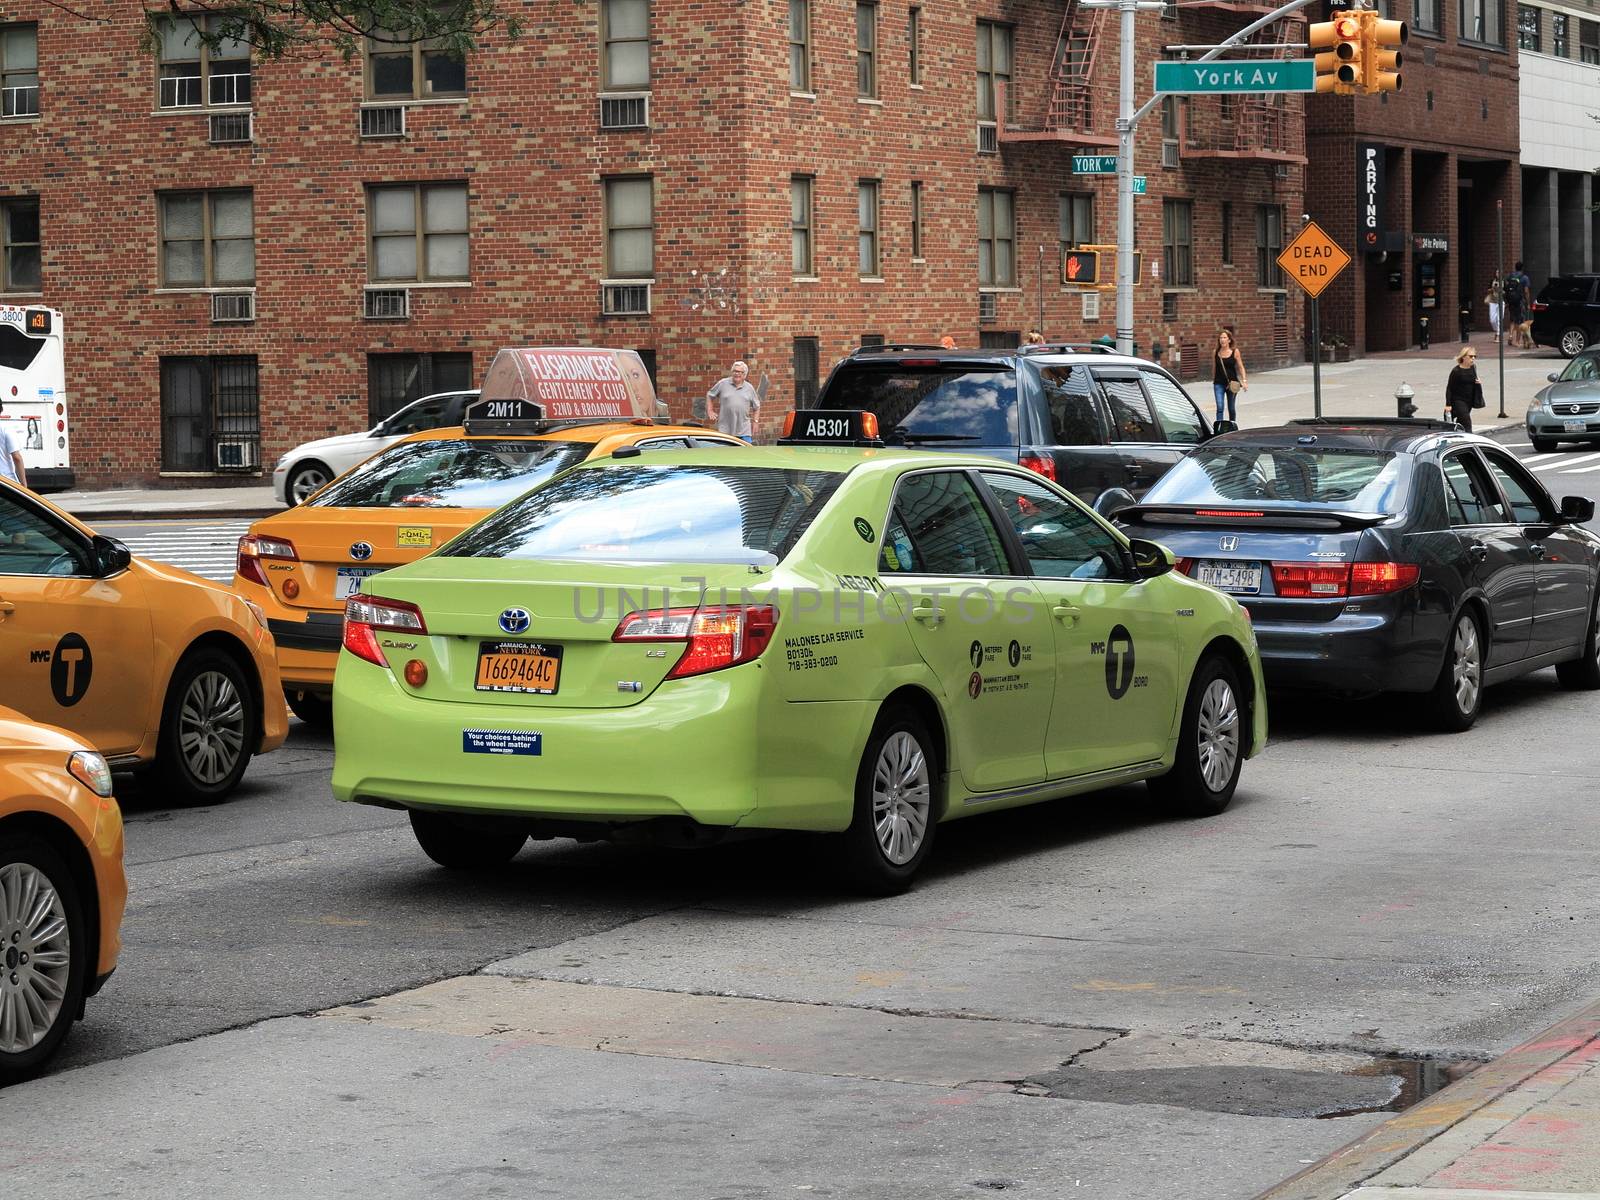 New York City Taxi Cabs by Ffooter